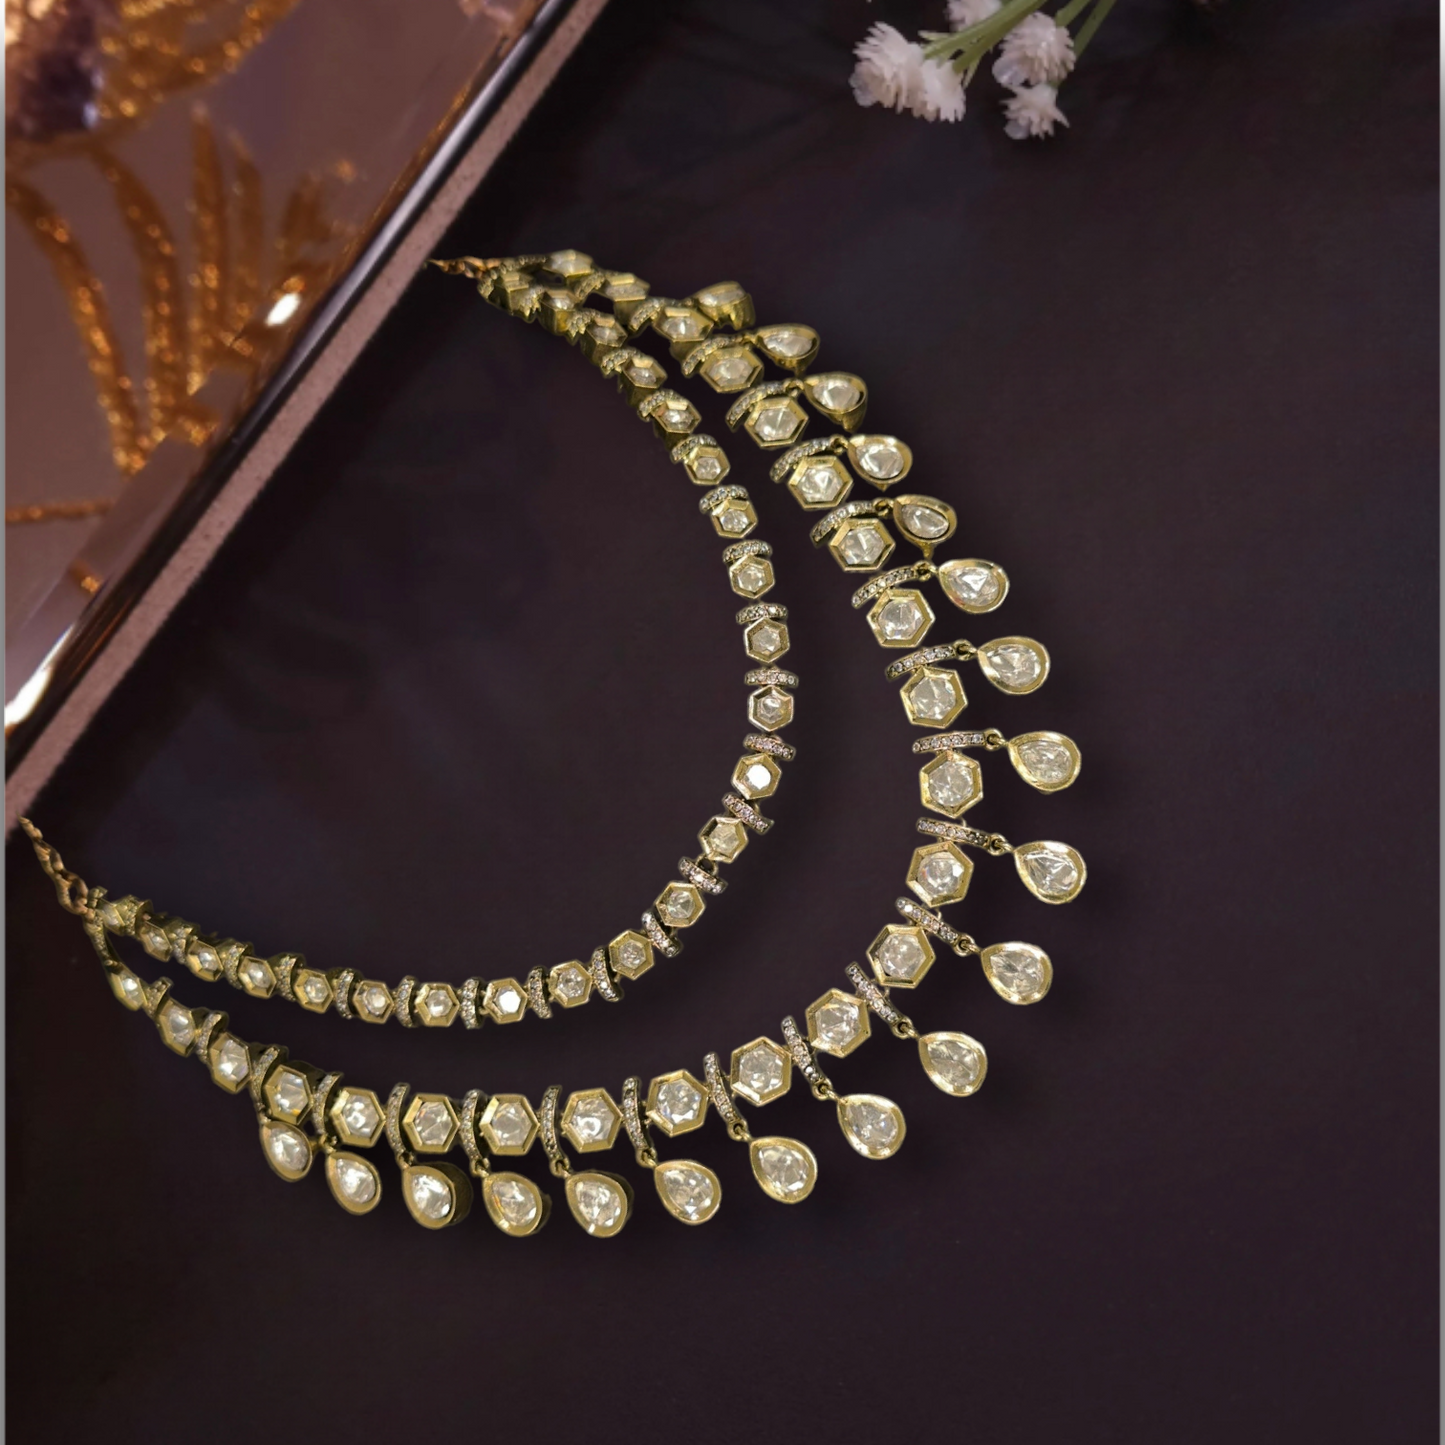 Designer two-step Victorian Necklace Set with zircon,and moissanite polki stones,including matching earrings. This Victorian Jewellery is available in a White colour variant. 